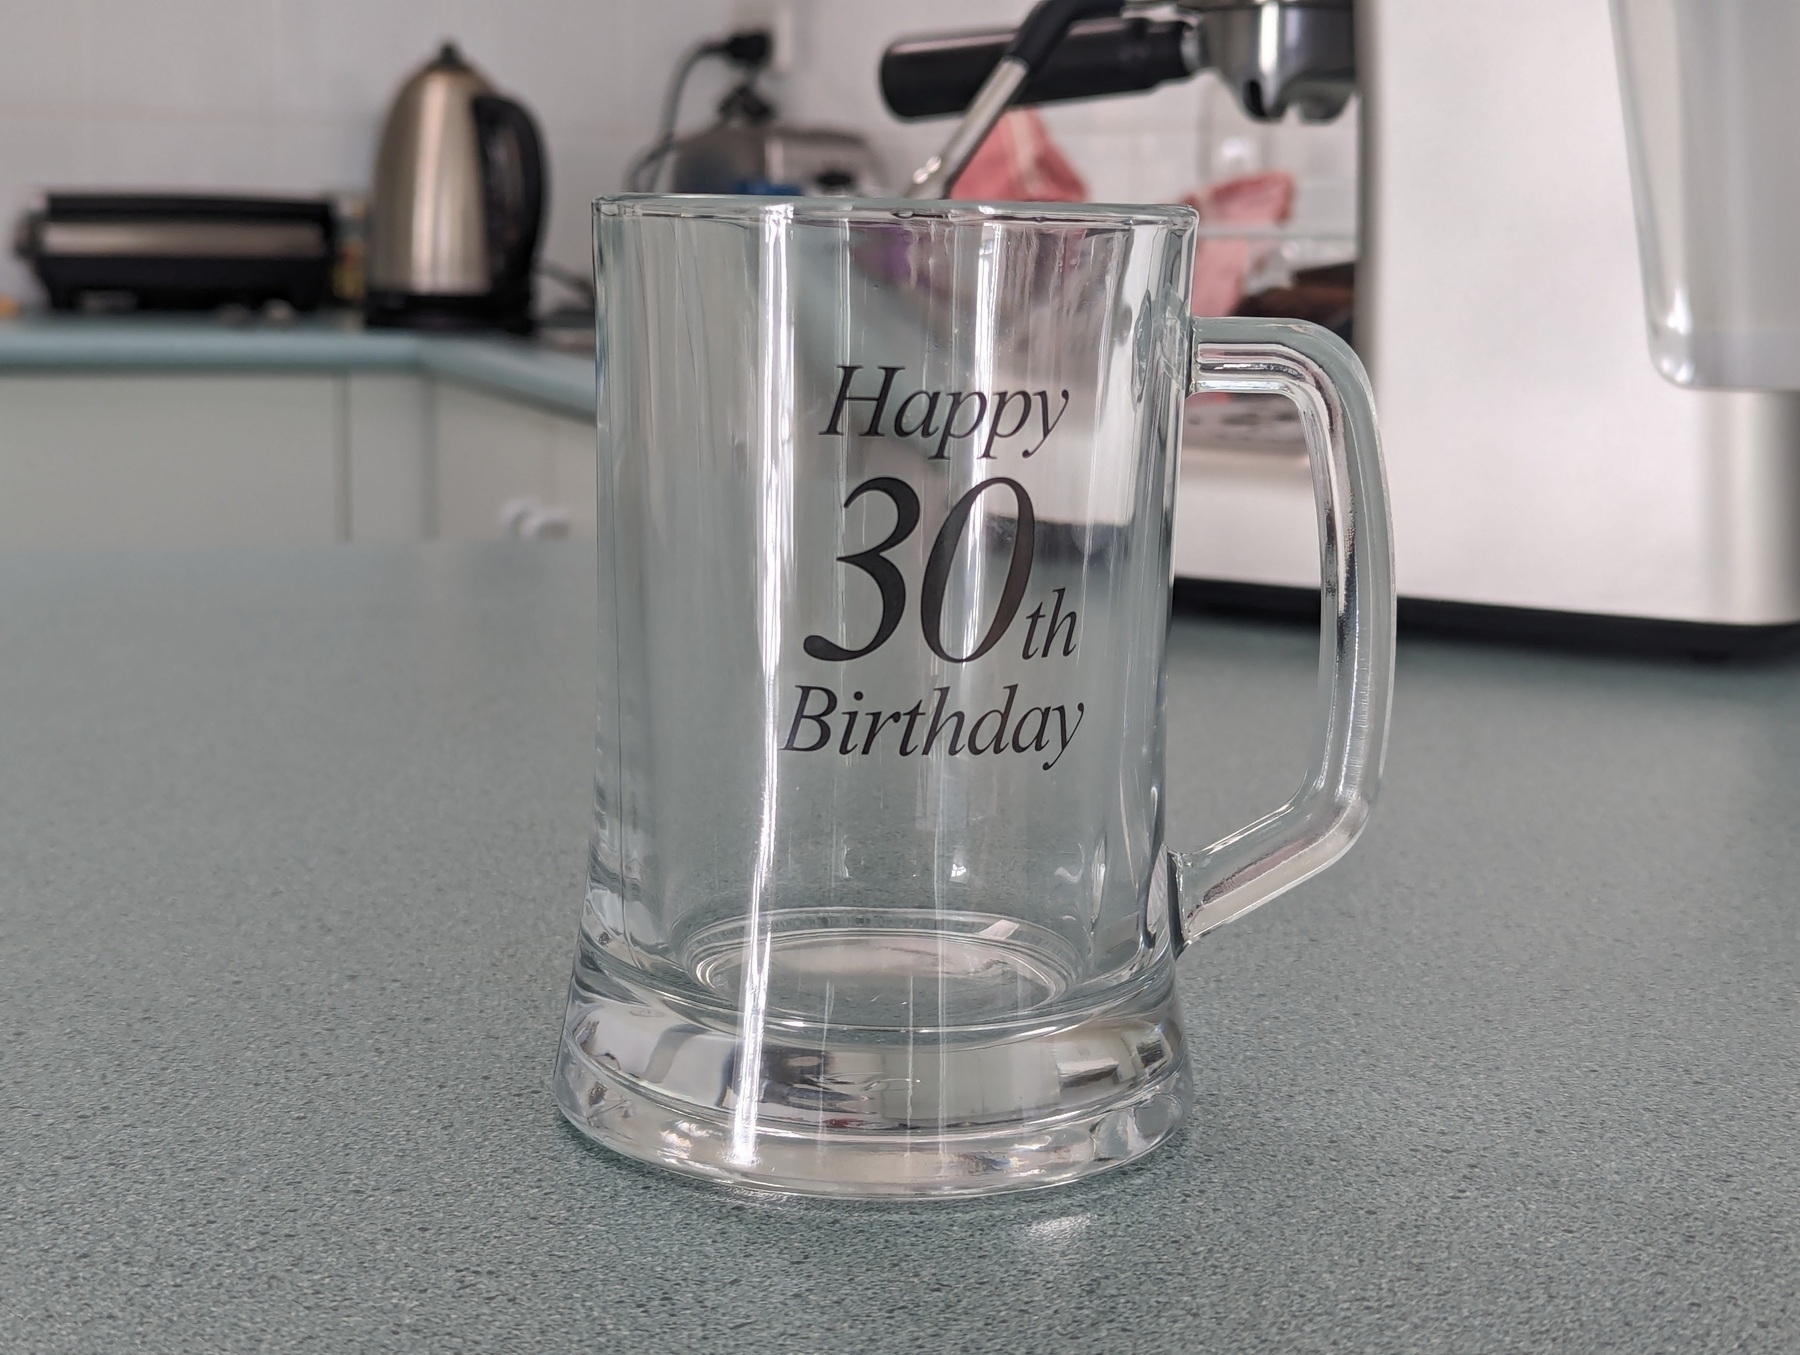 A glass stein on a bench with the inscription "Happy 30th Birthday" written on the front